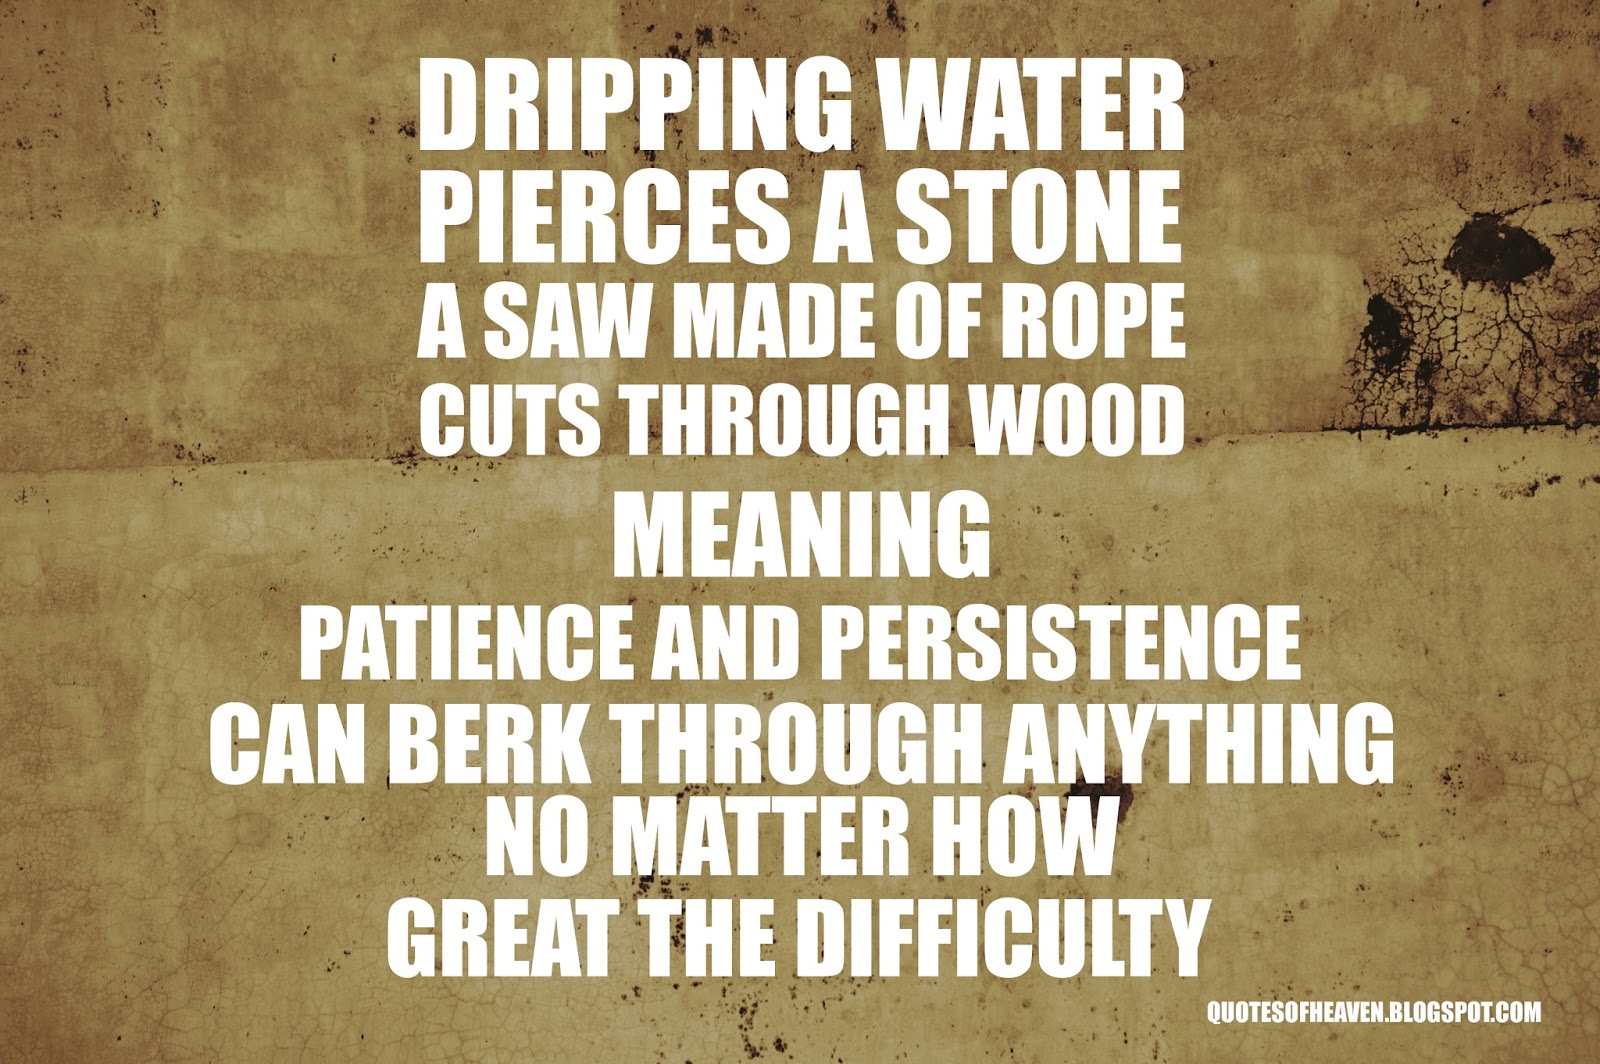 Meaning Patience and persistence can berk through anything no matter how great the difficulty "